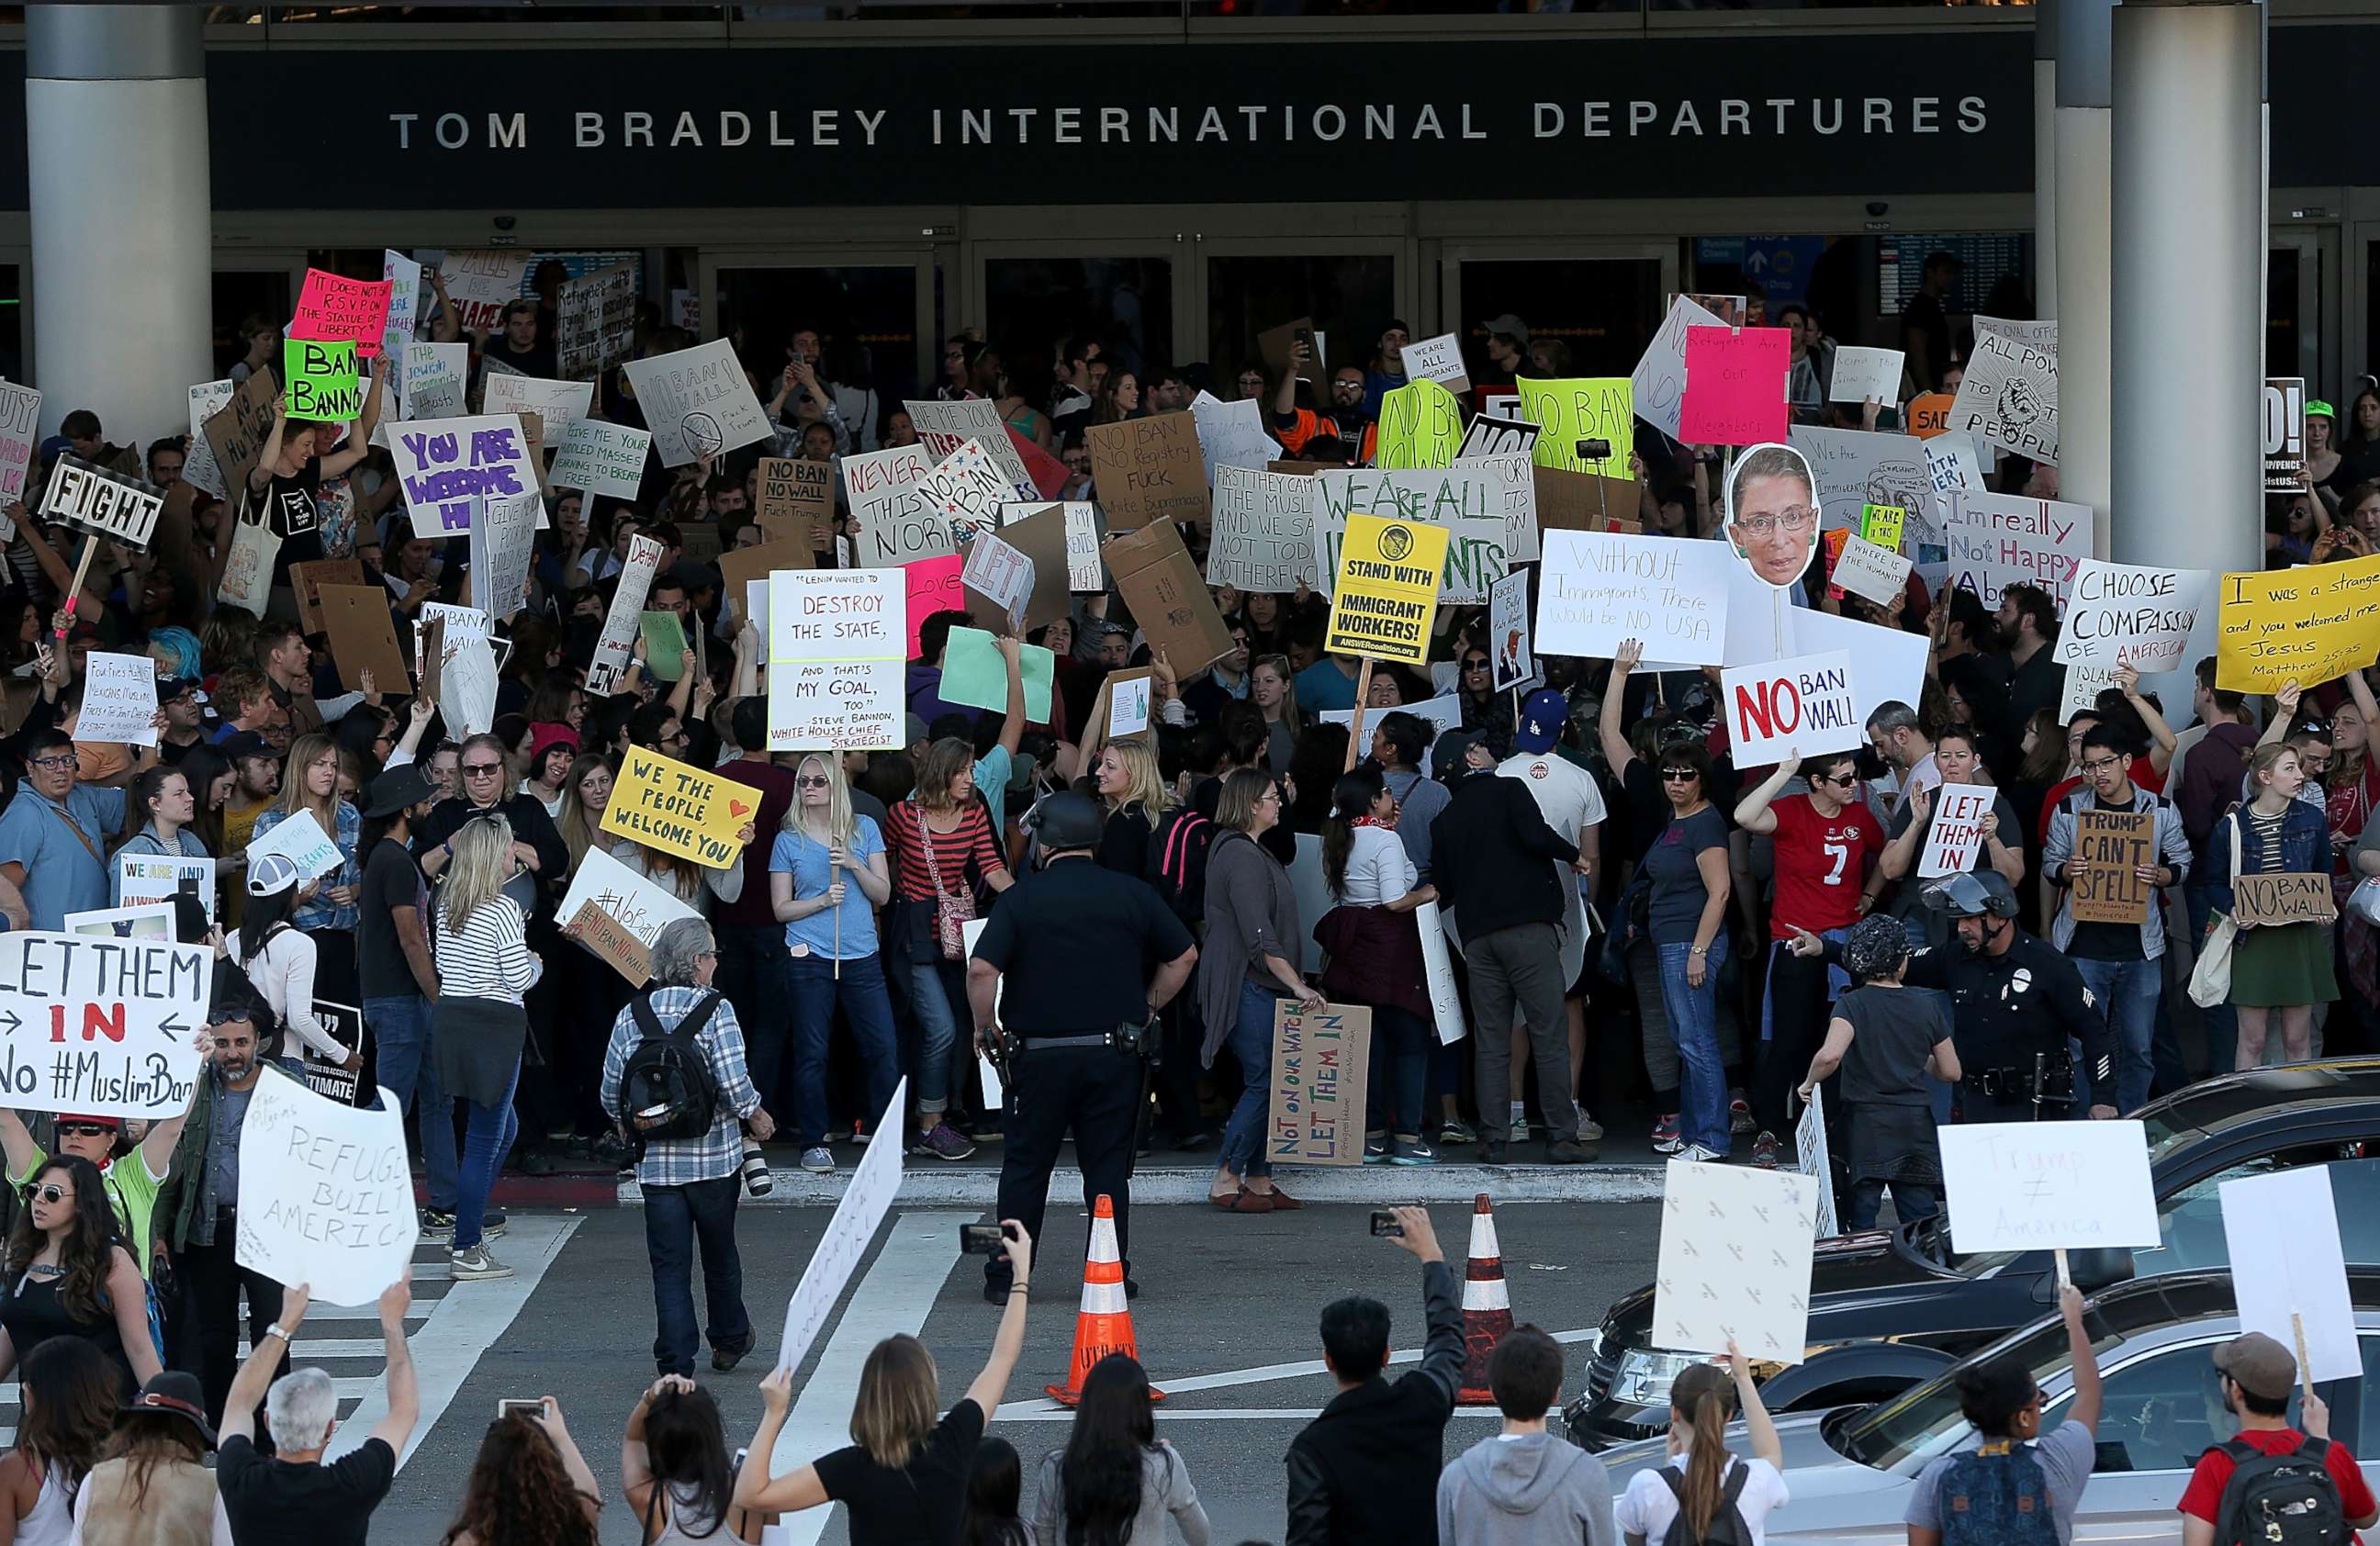 PHOTO: Protesters hold signs during a demonstration against the immigration ban that was imposed by U.S. President Donald Trump at Los Angeles International Airport, Jan. 29, 2017.